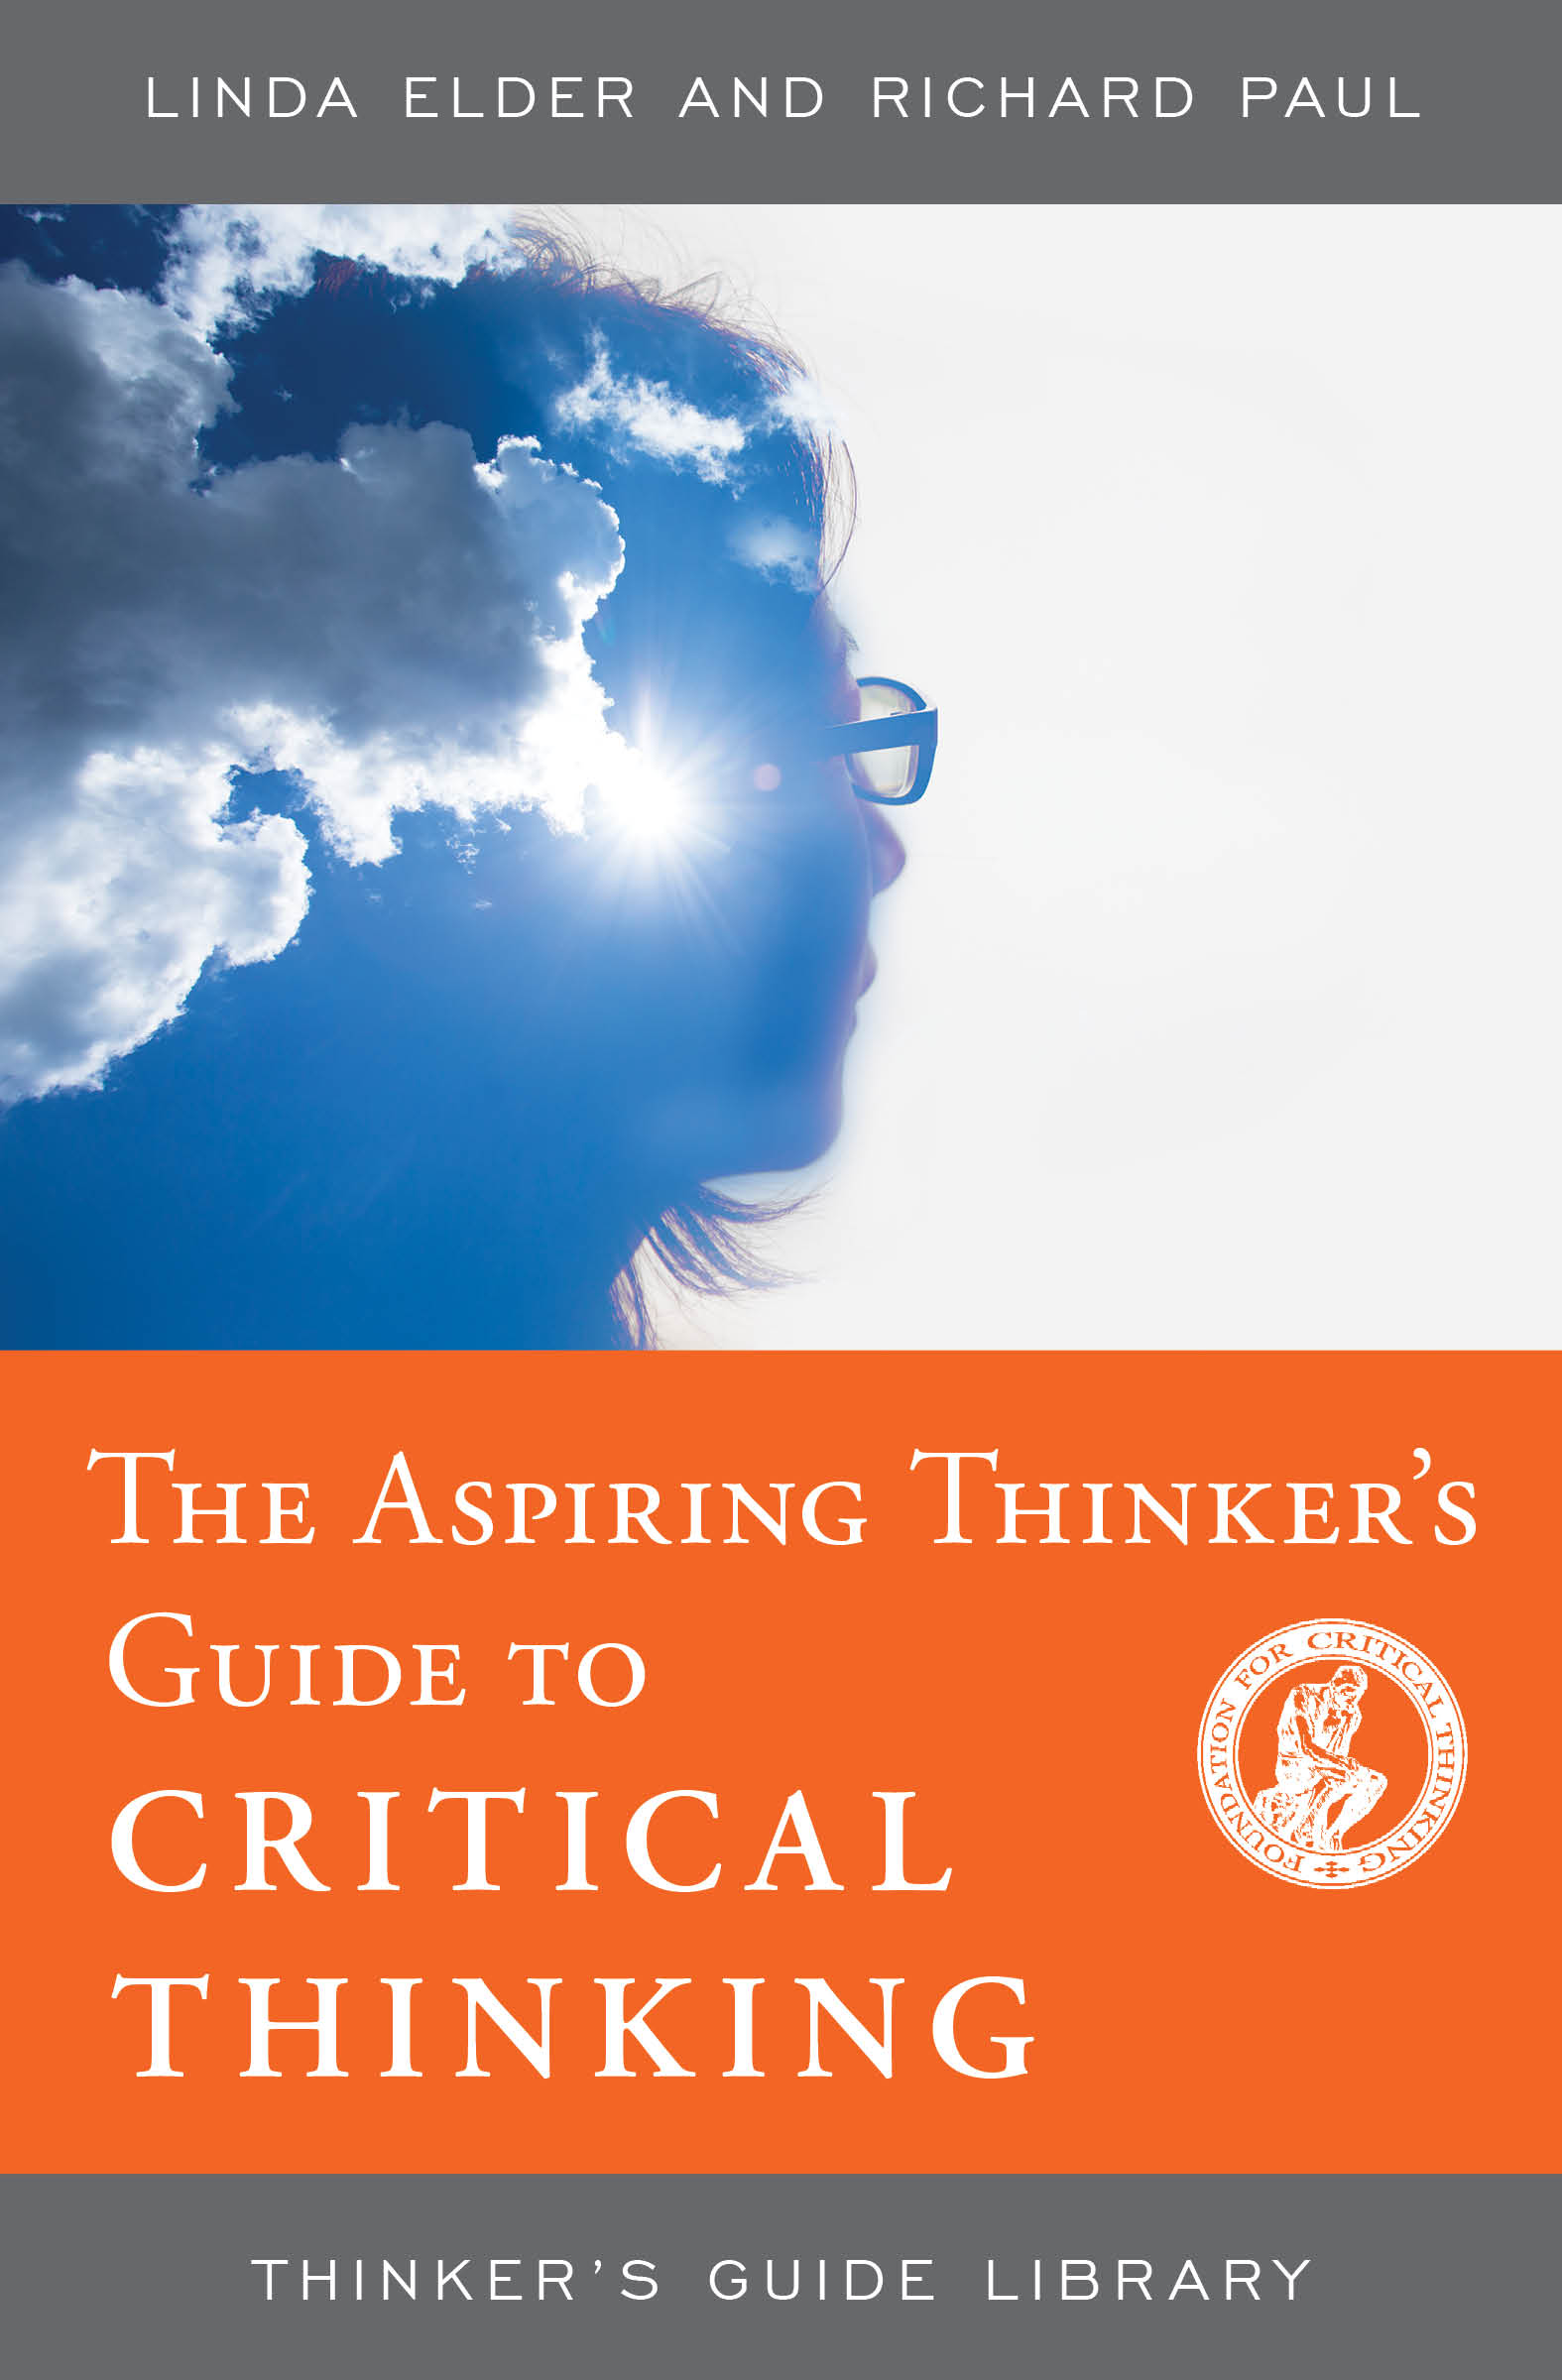 The Aspiring Thinker's Guide to Critical Thinking